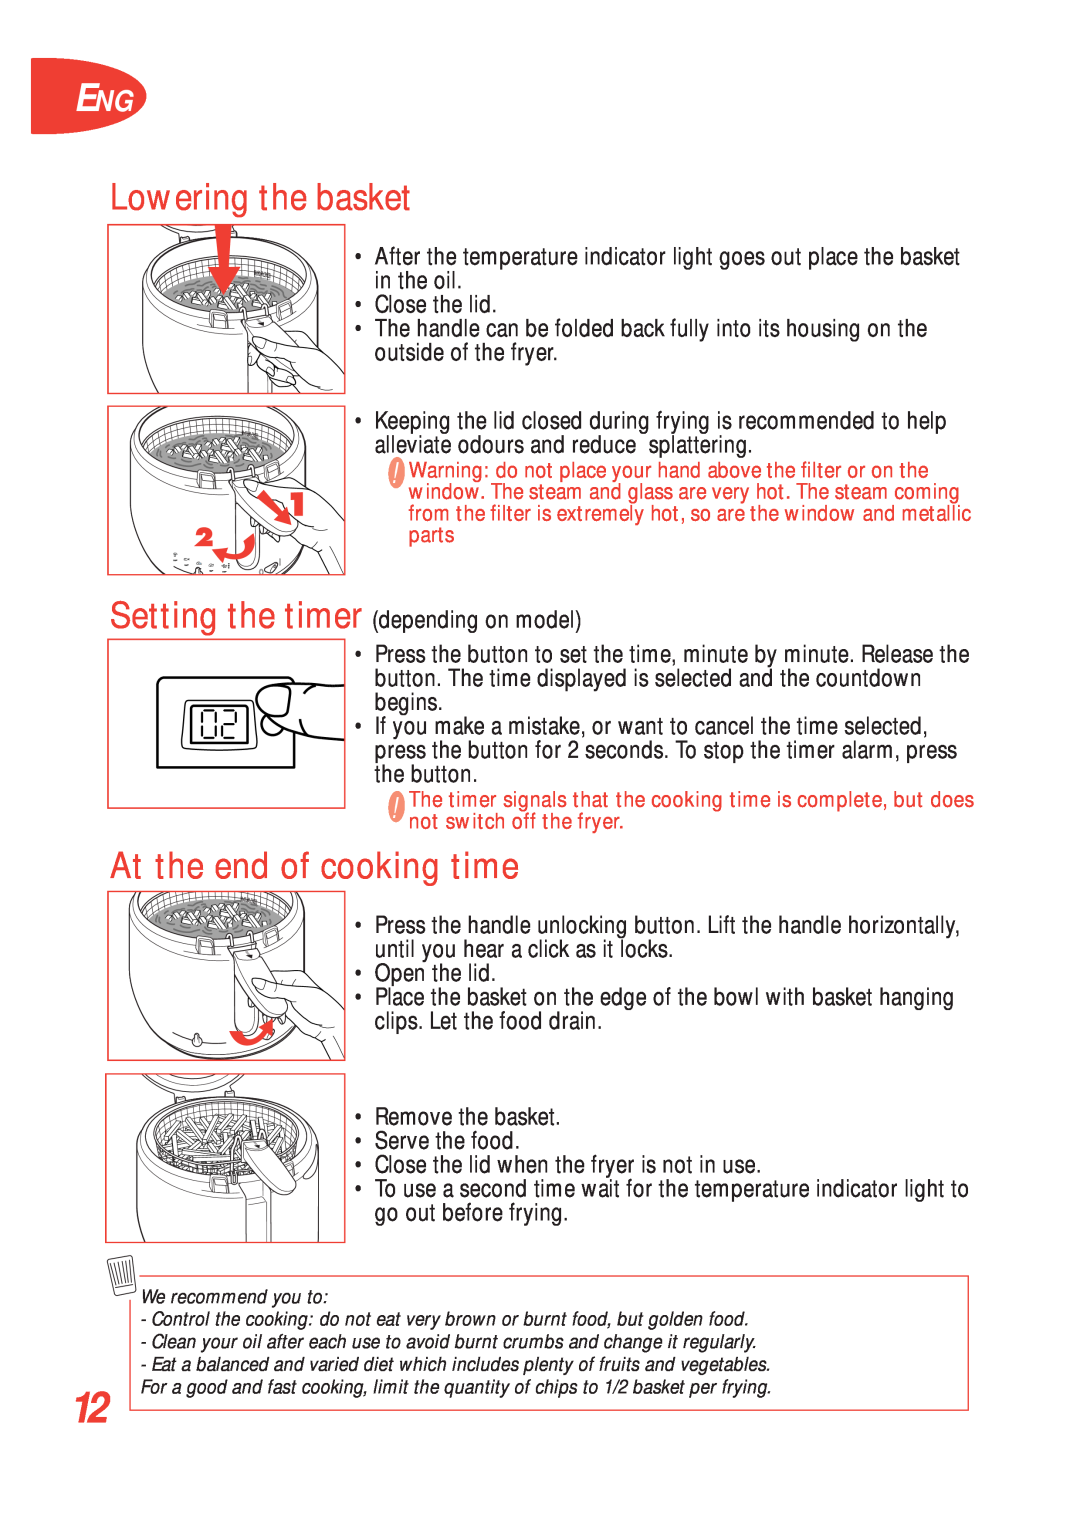 Tefal FF100035, FF100073, FF100015, FF100017, FF100000, FF100001, FF100016 manual Lowering the basket, At the end of cooking time 